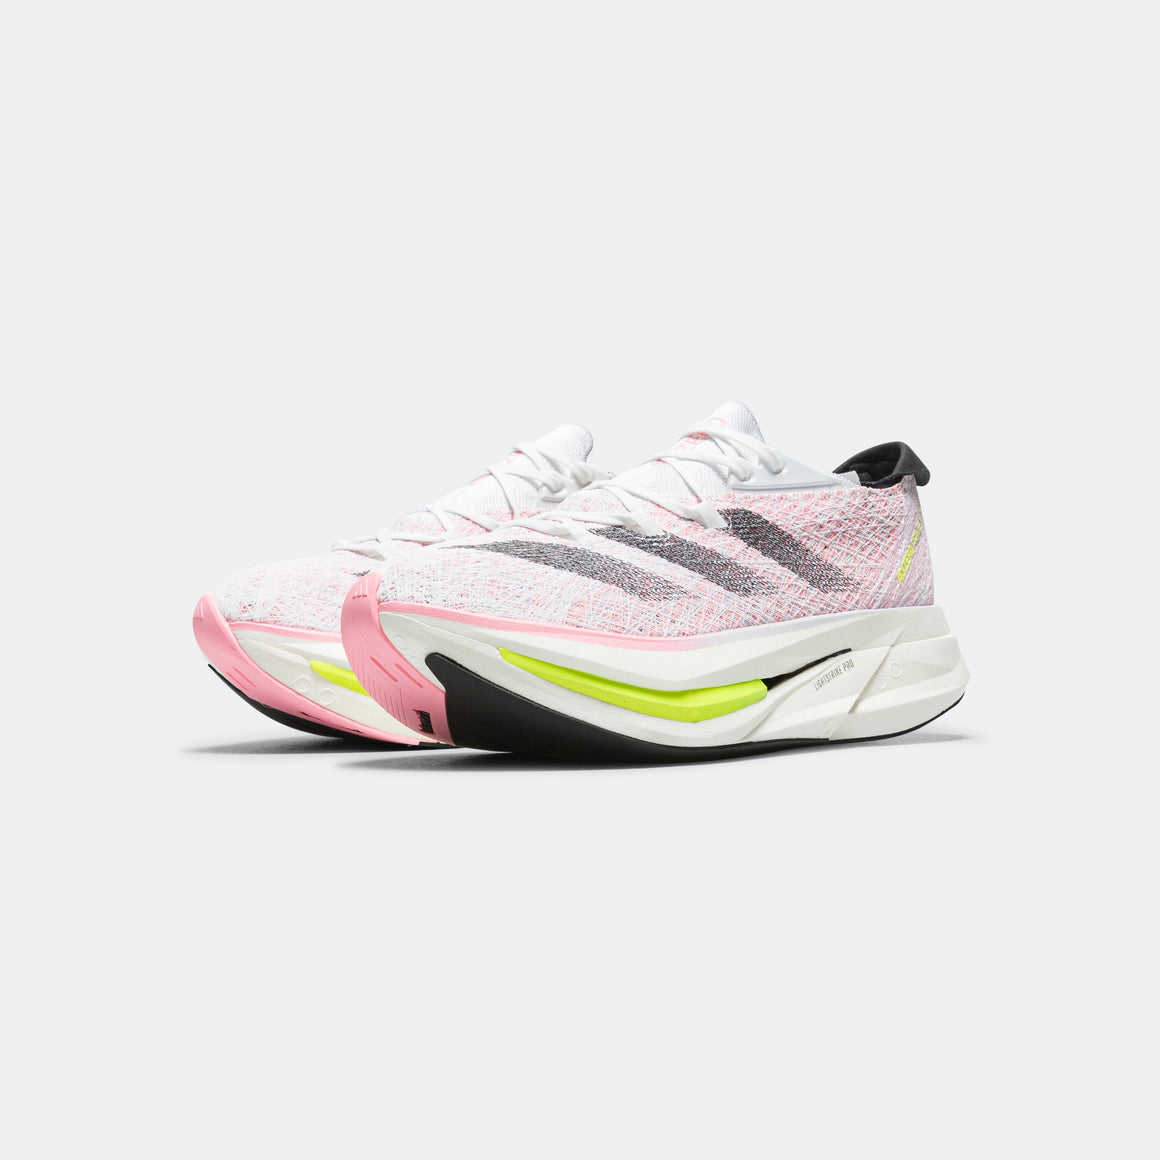 adidas - Mens Adizero Prime X 2 Strung - Footwear White/Core Black/Pink Spark - Up There Athletics